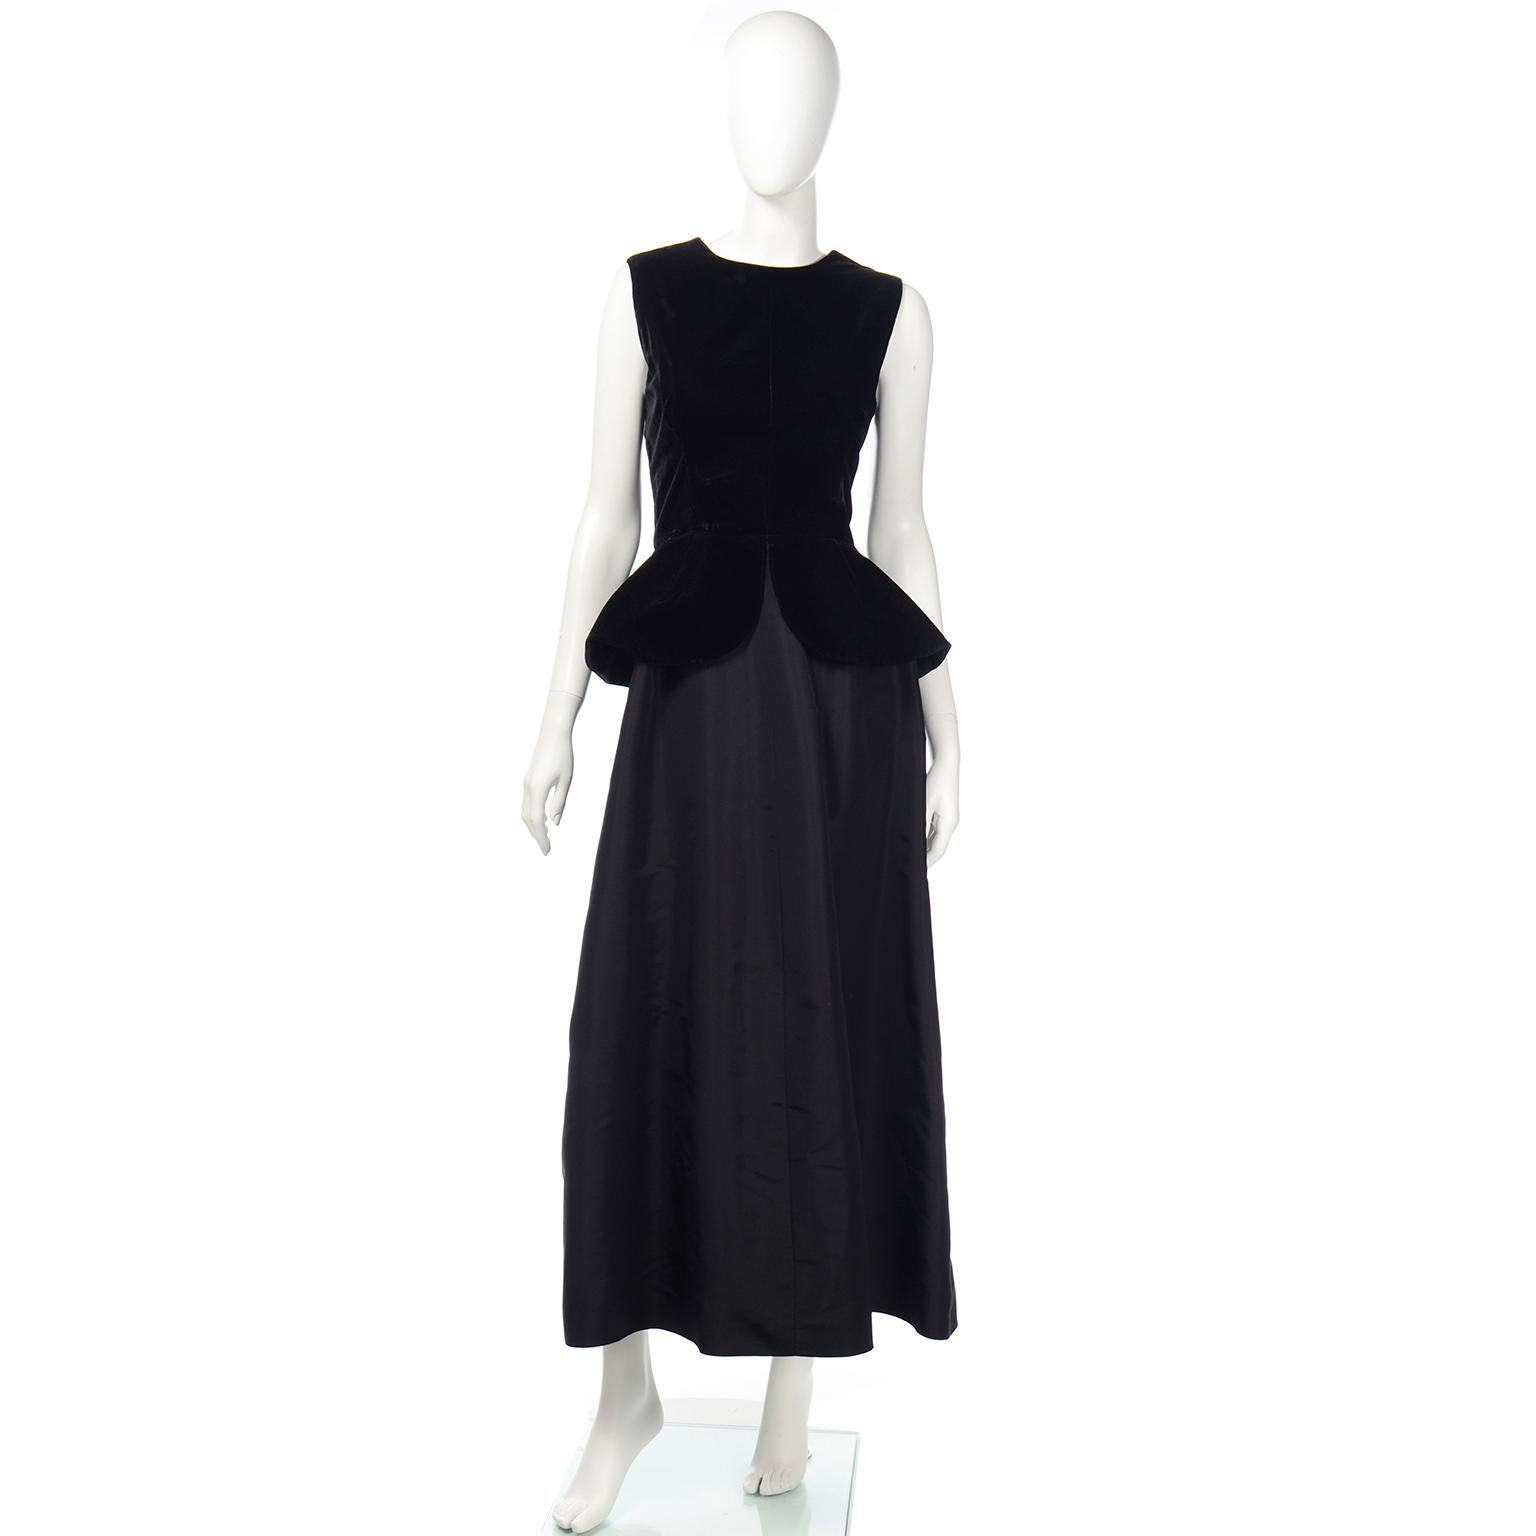 This is an elegant all black vintage evening dress from Givenchy with a velvet bodice and peplum and a satin long skirt. Perfect for any black tie event or special evening. This gorgeous sleeveless evening gown has a round neckline and closes with a